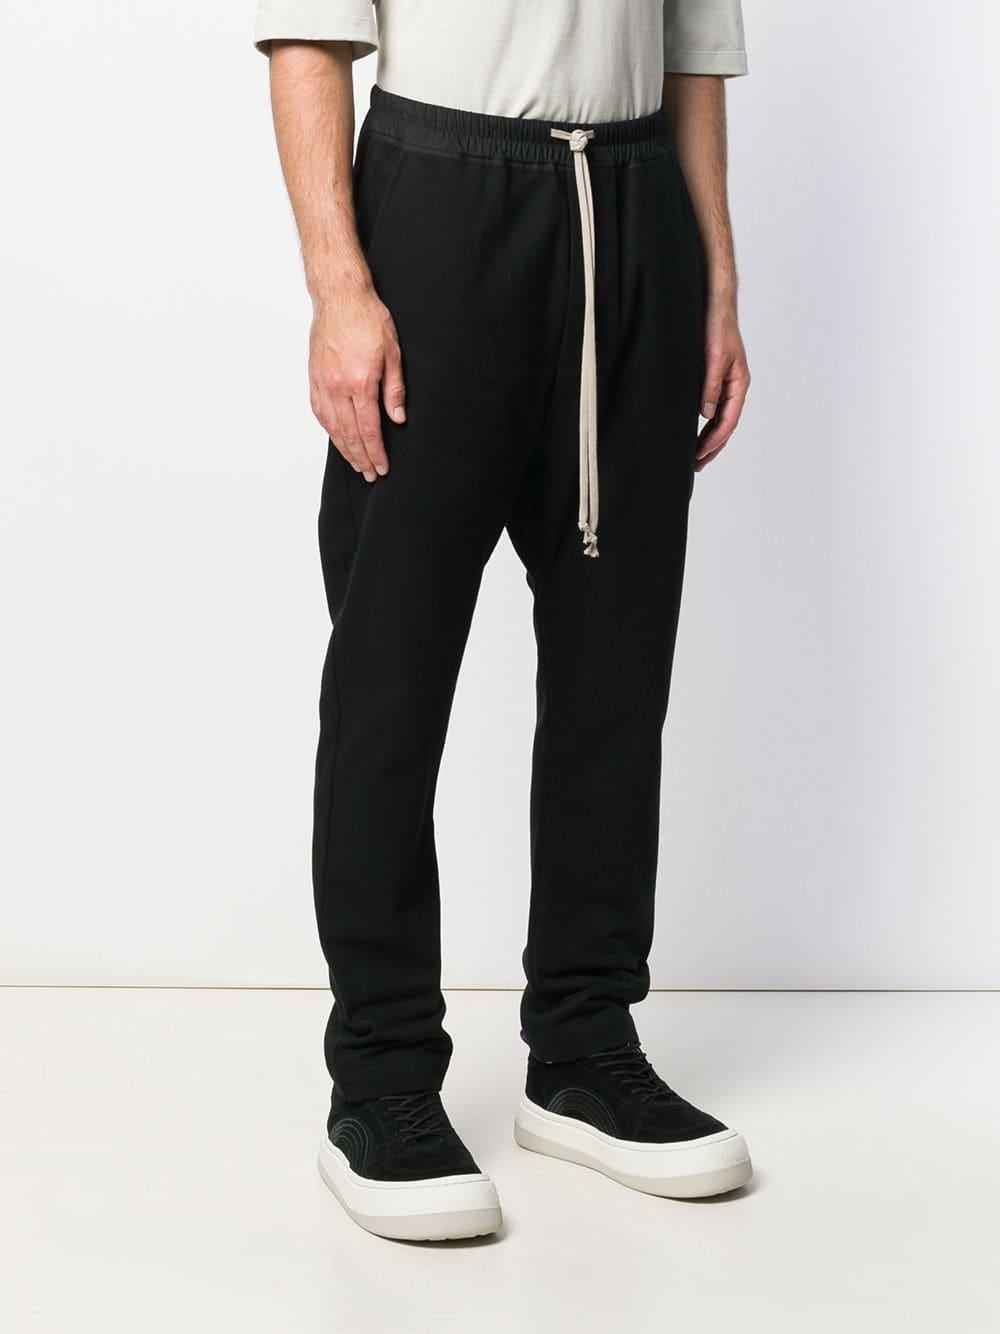 Rick Owens Cotton Dropped Crotch Trousers in Black for Men - Lyst